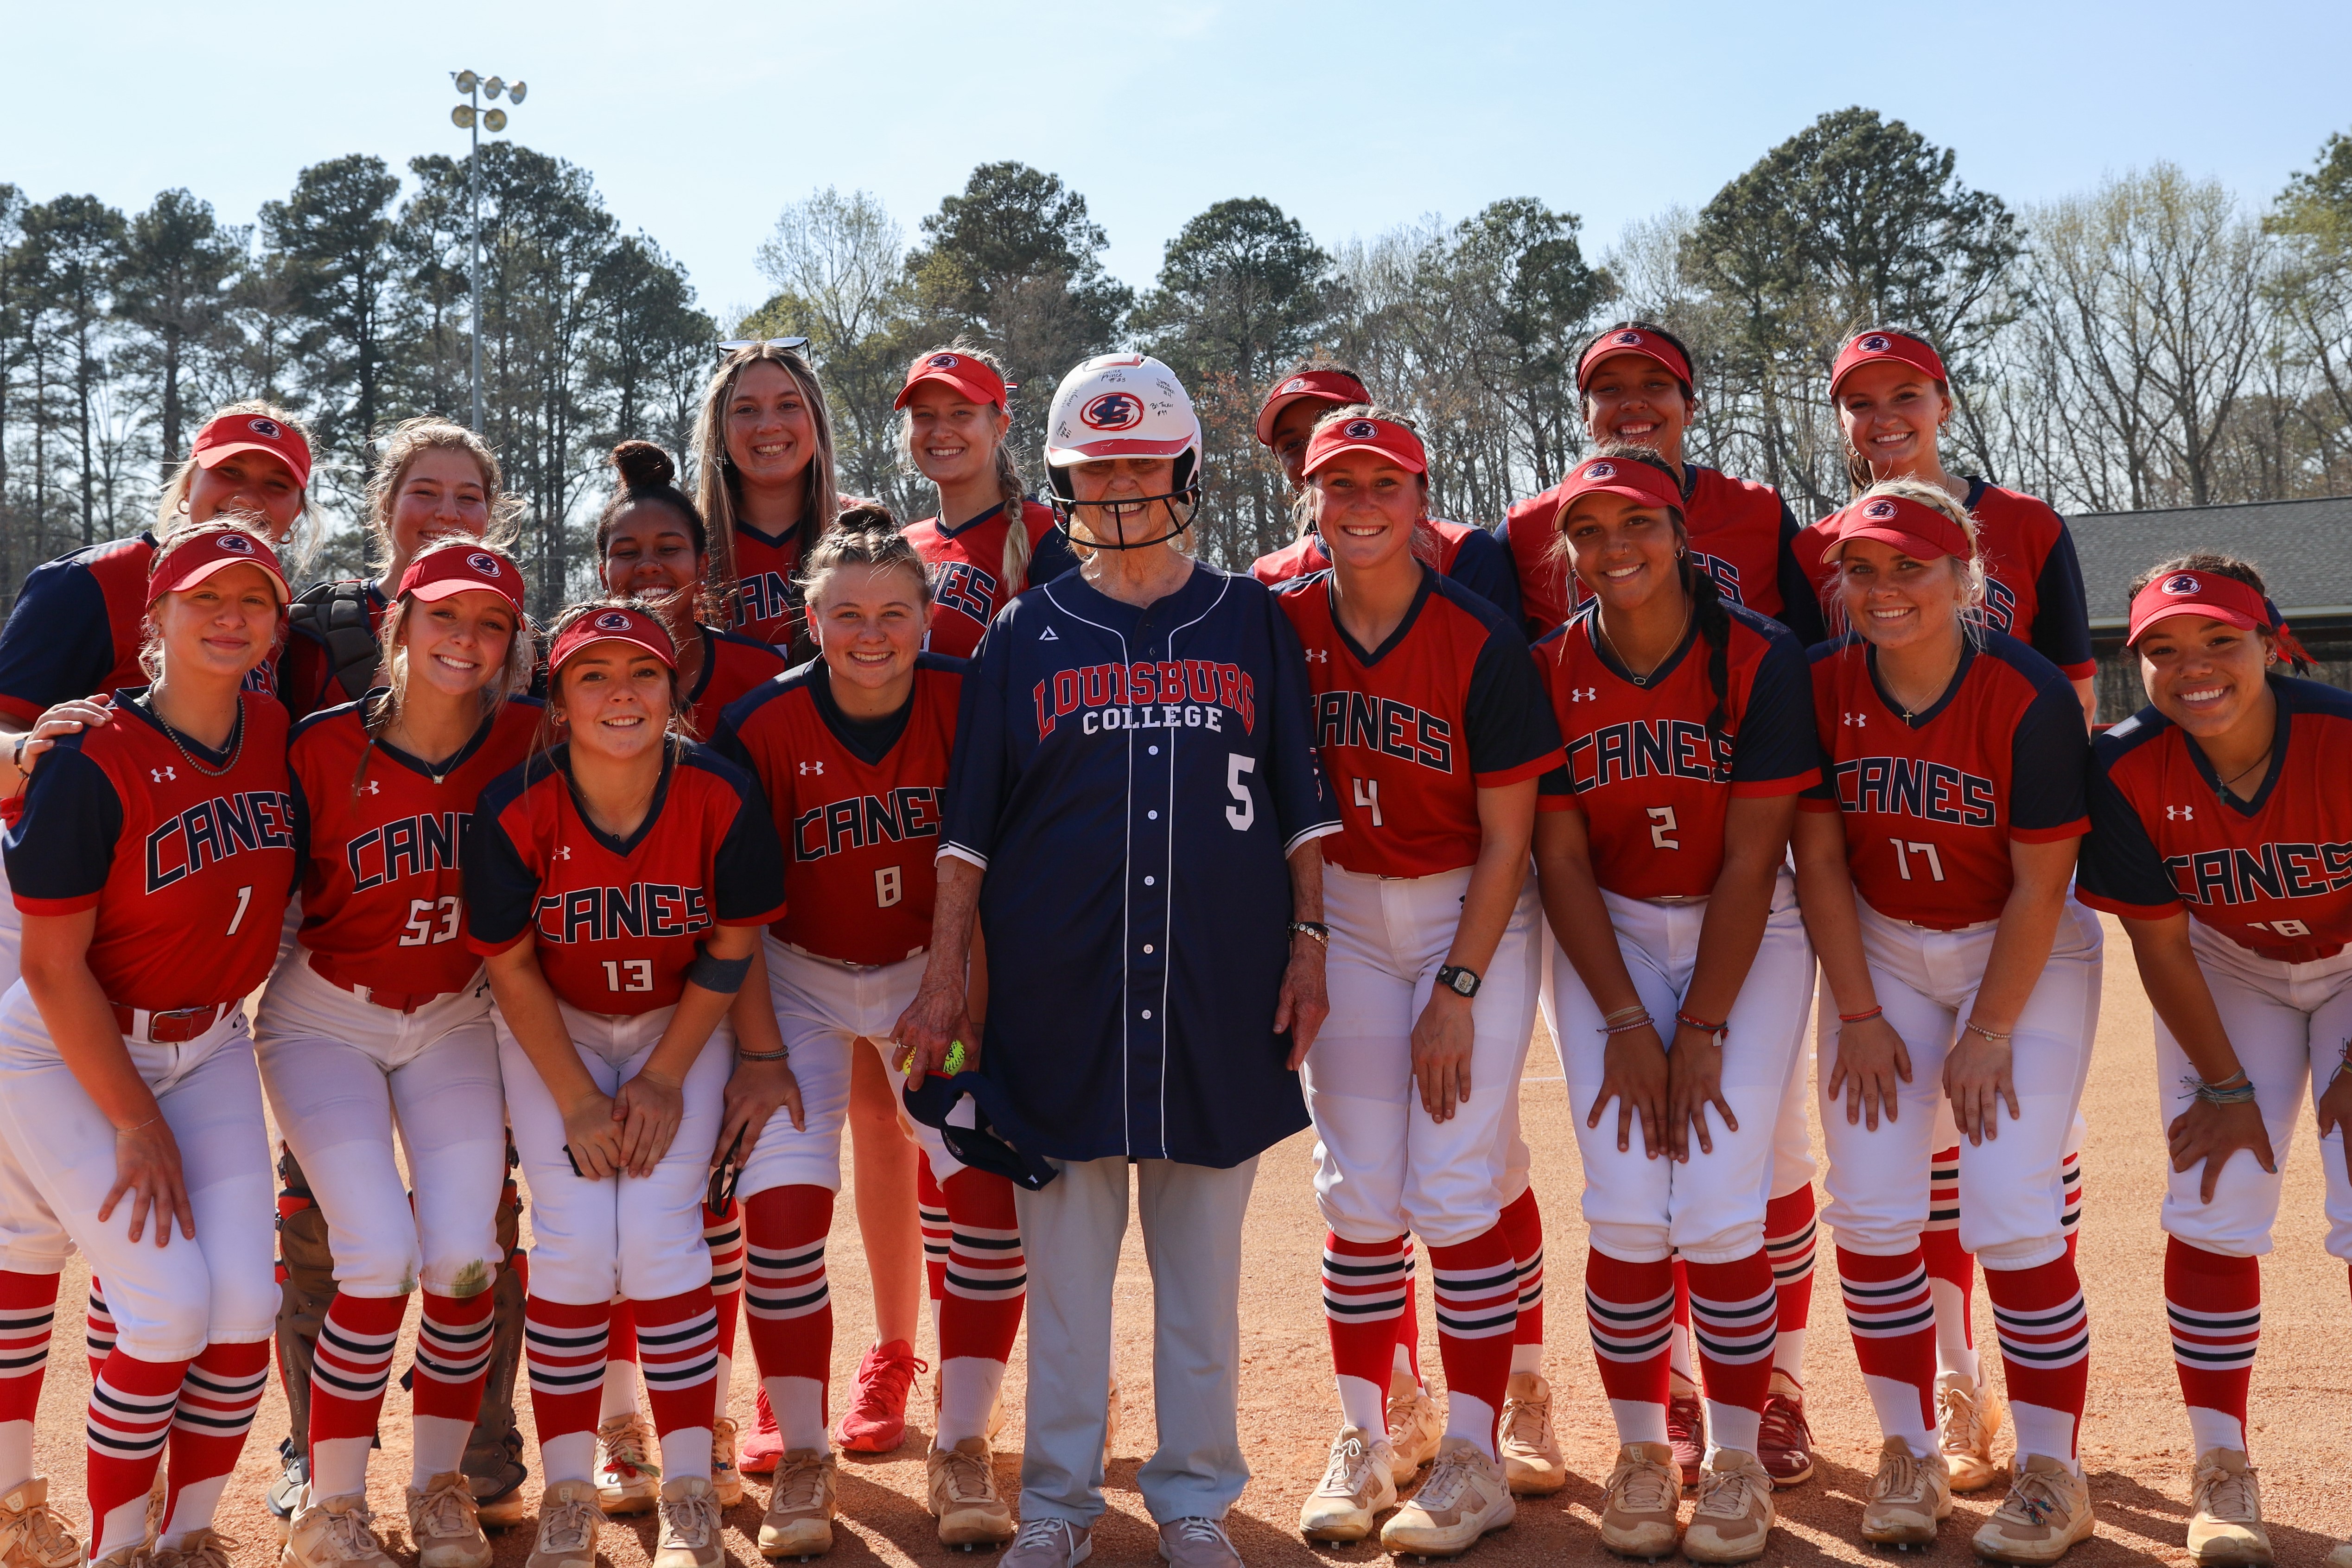 Lucy T. Allen with softball team